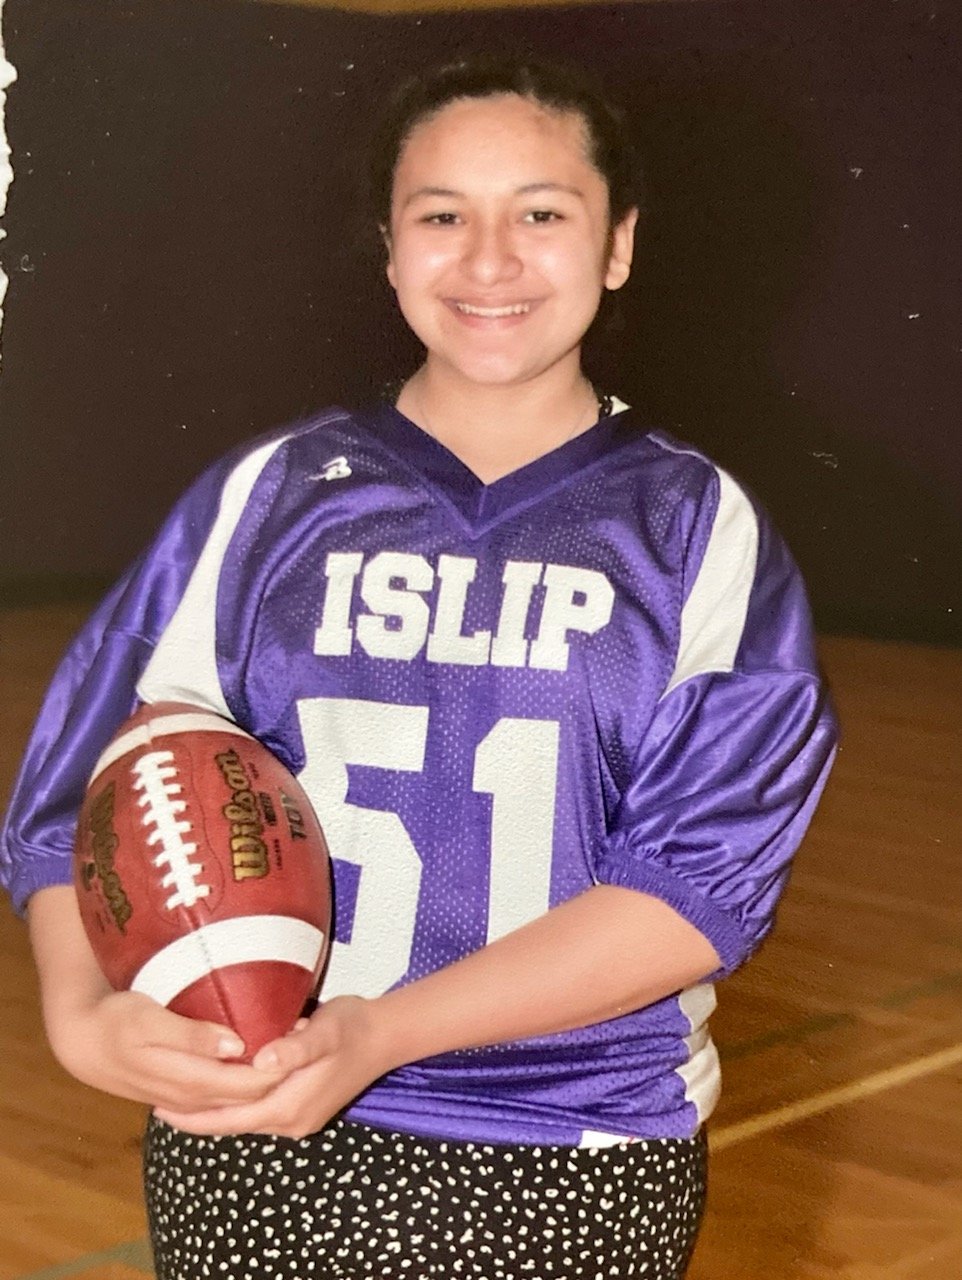 Addison DeFalco is the proud left guard for Islip Middle School football.